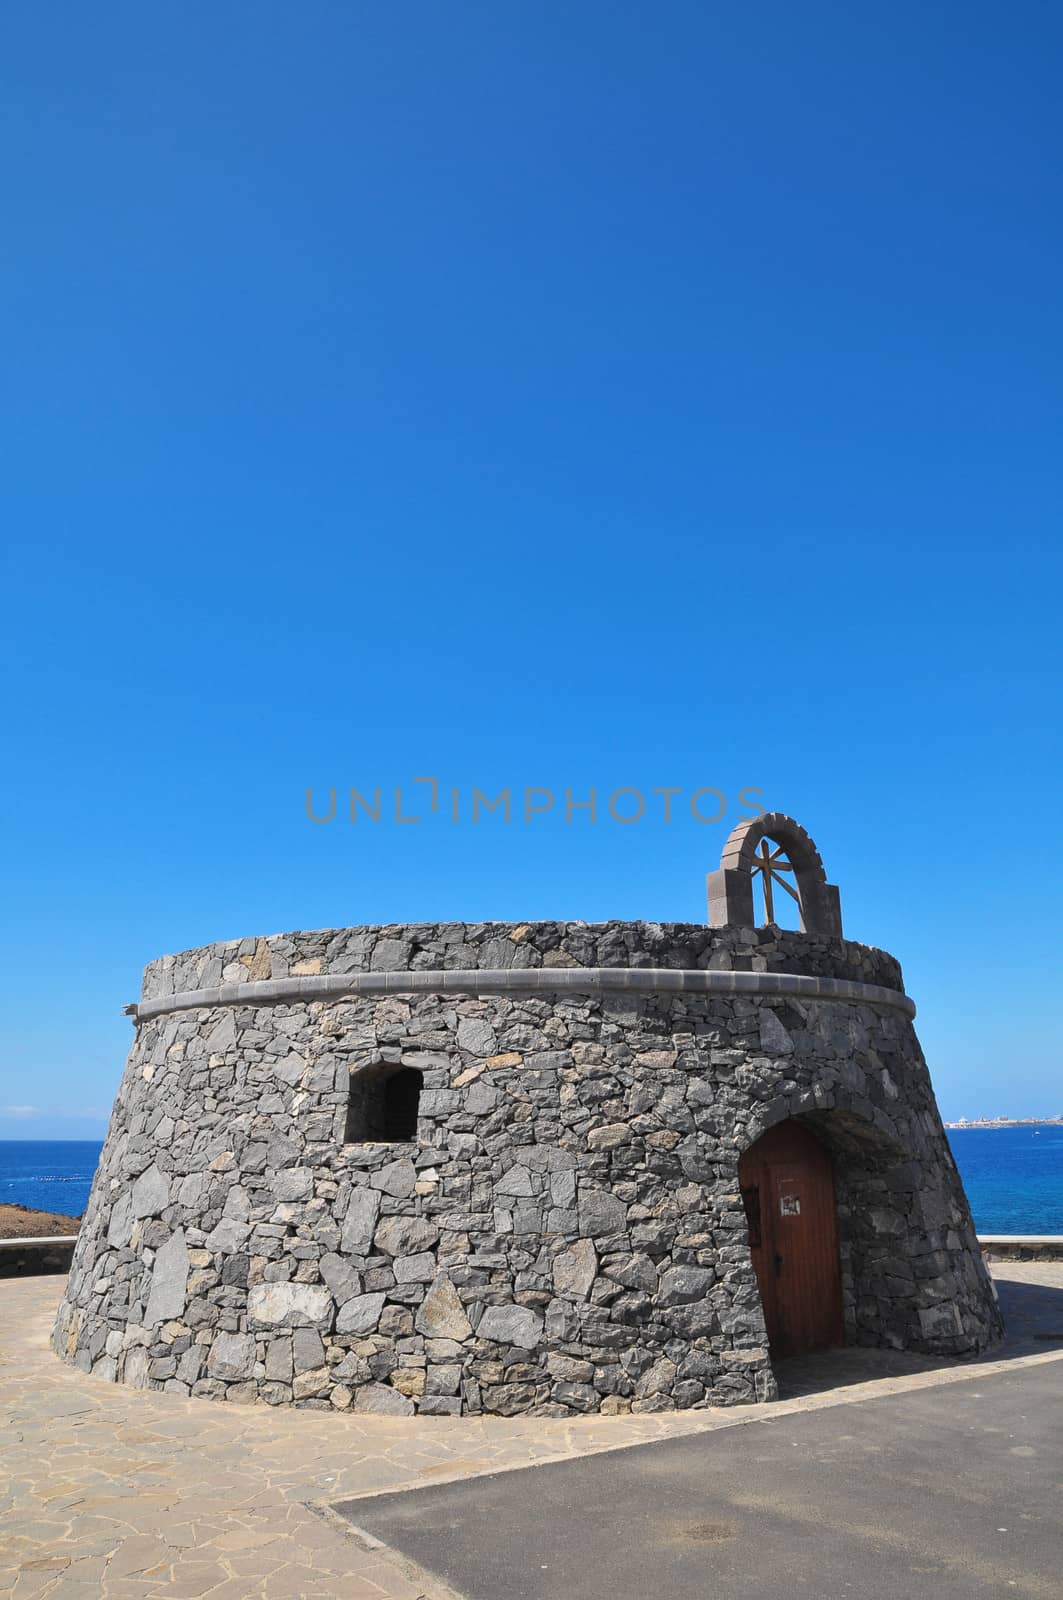 Gray Textured Bunker on a Blue Sky in Spain